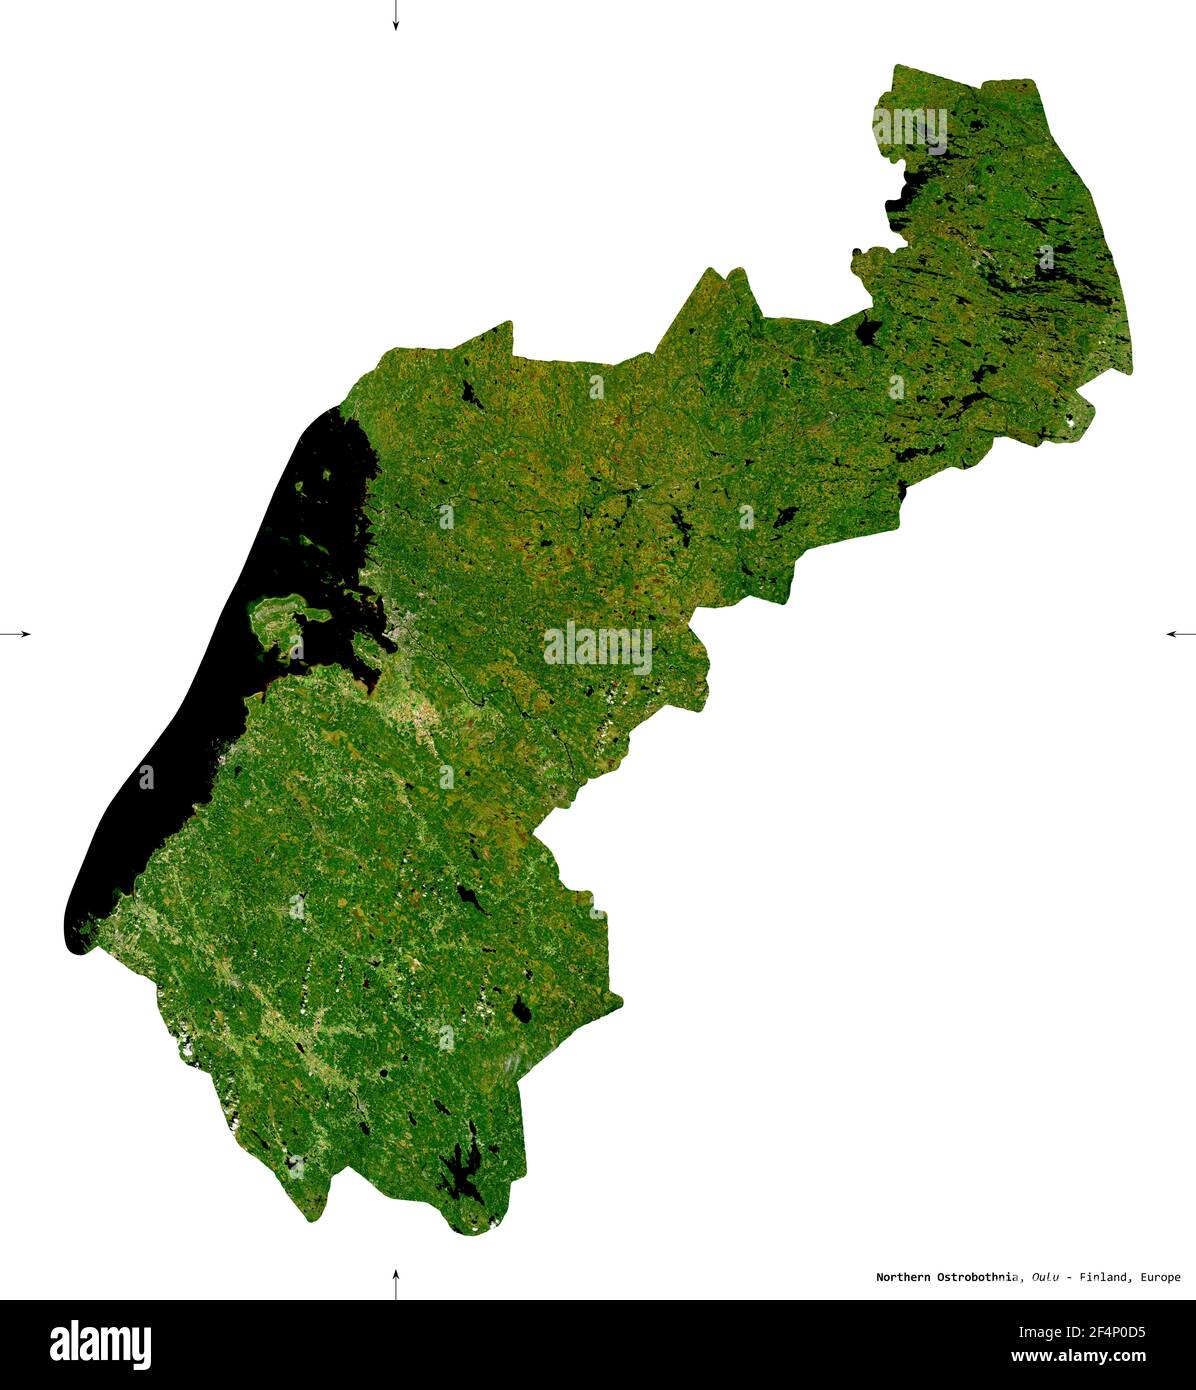 Northern Ostrobothnia, region of Finland. Sentinel-2 satellite imagery. Shape isolated on white. Description, location of the capital. Contains modifi Stock Photo